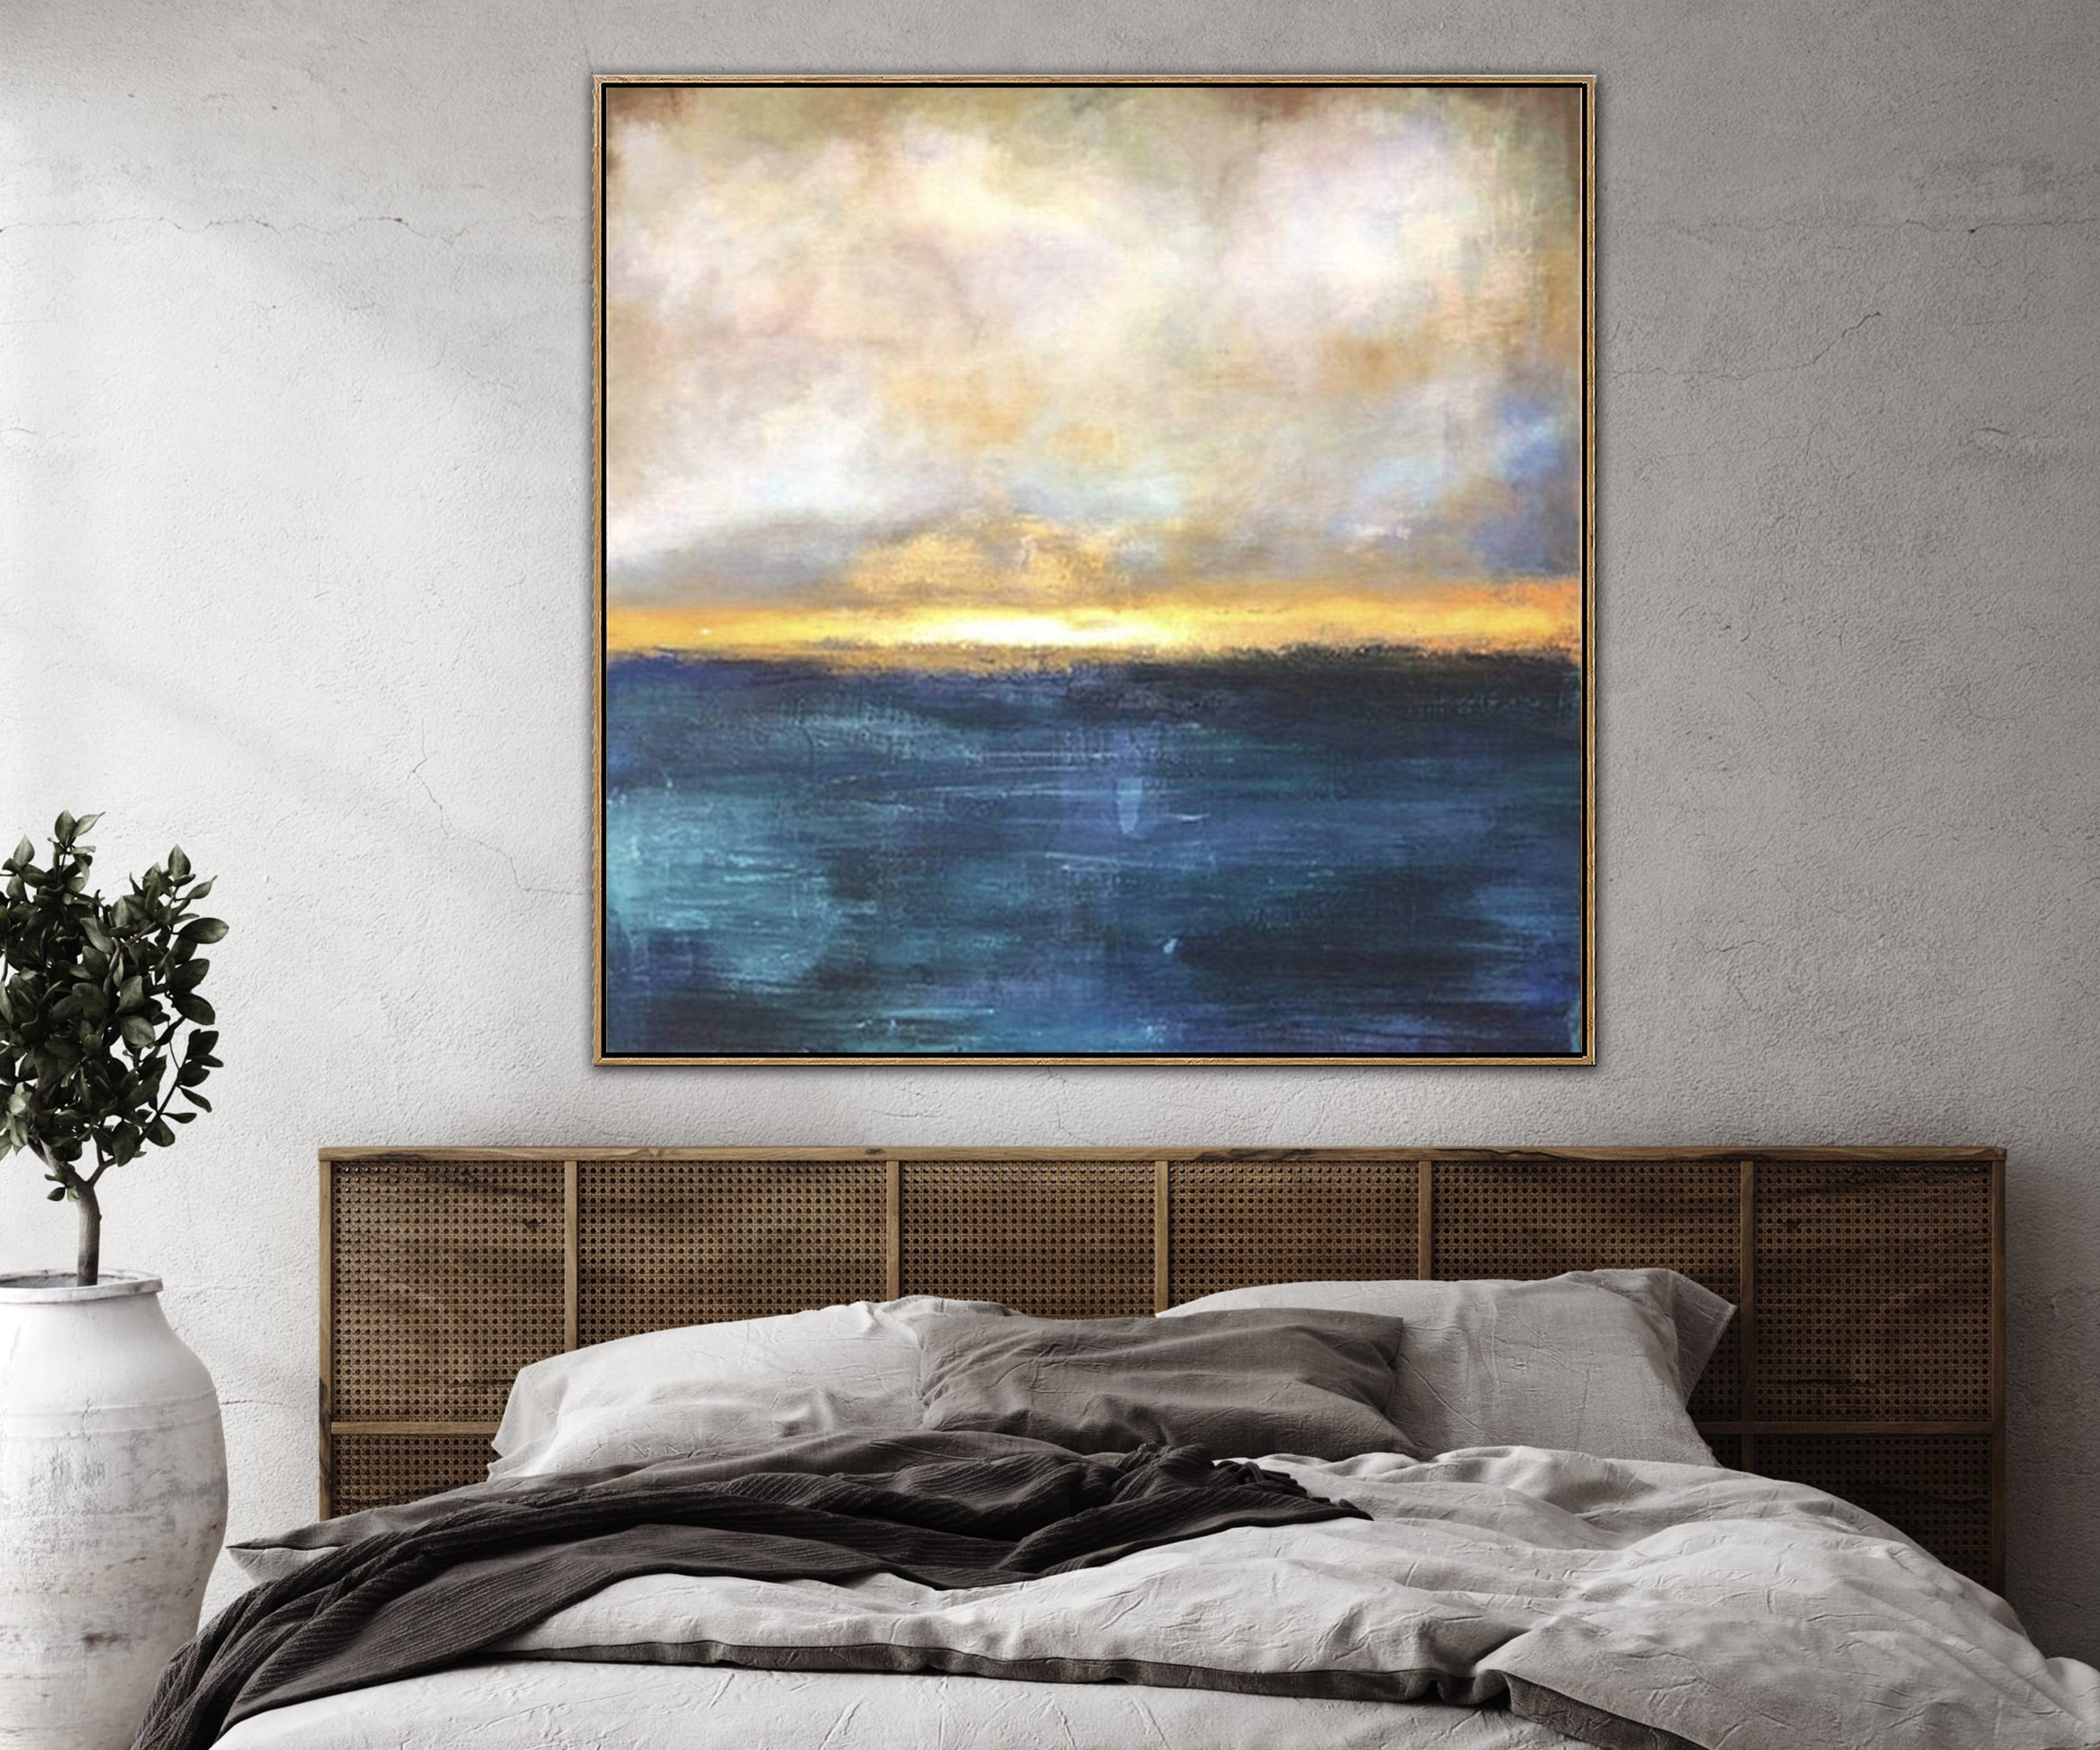 SUMMER SUNSET from $350.26